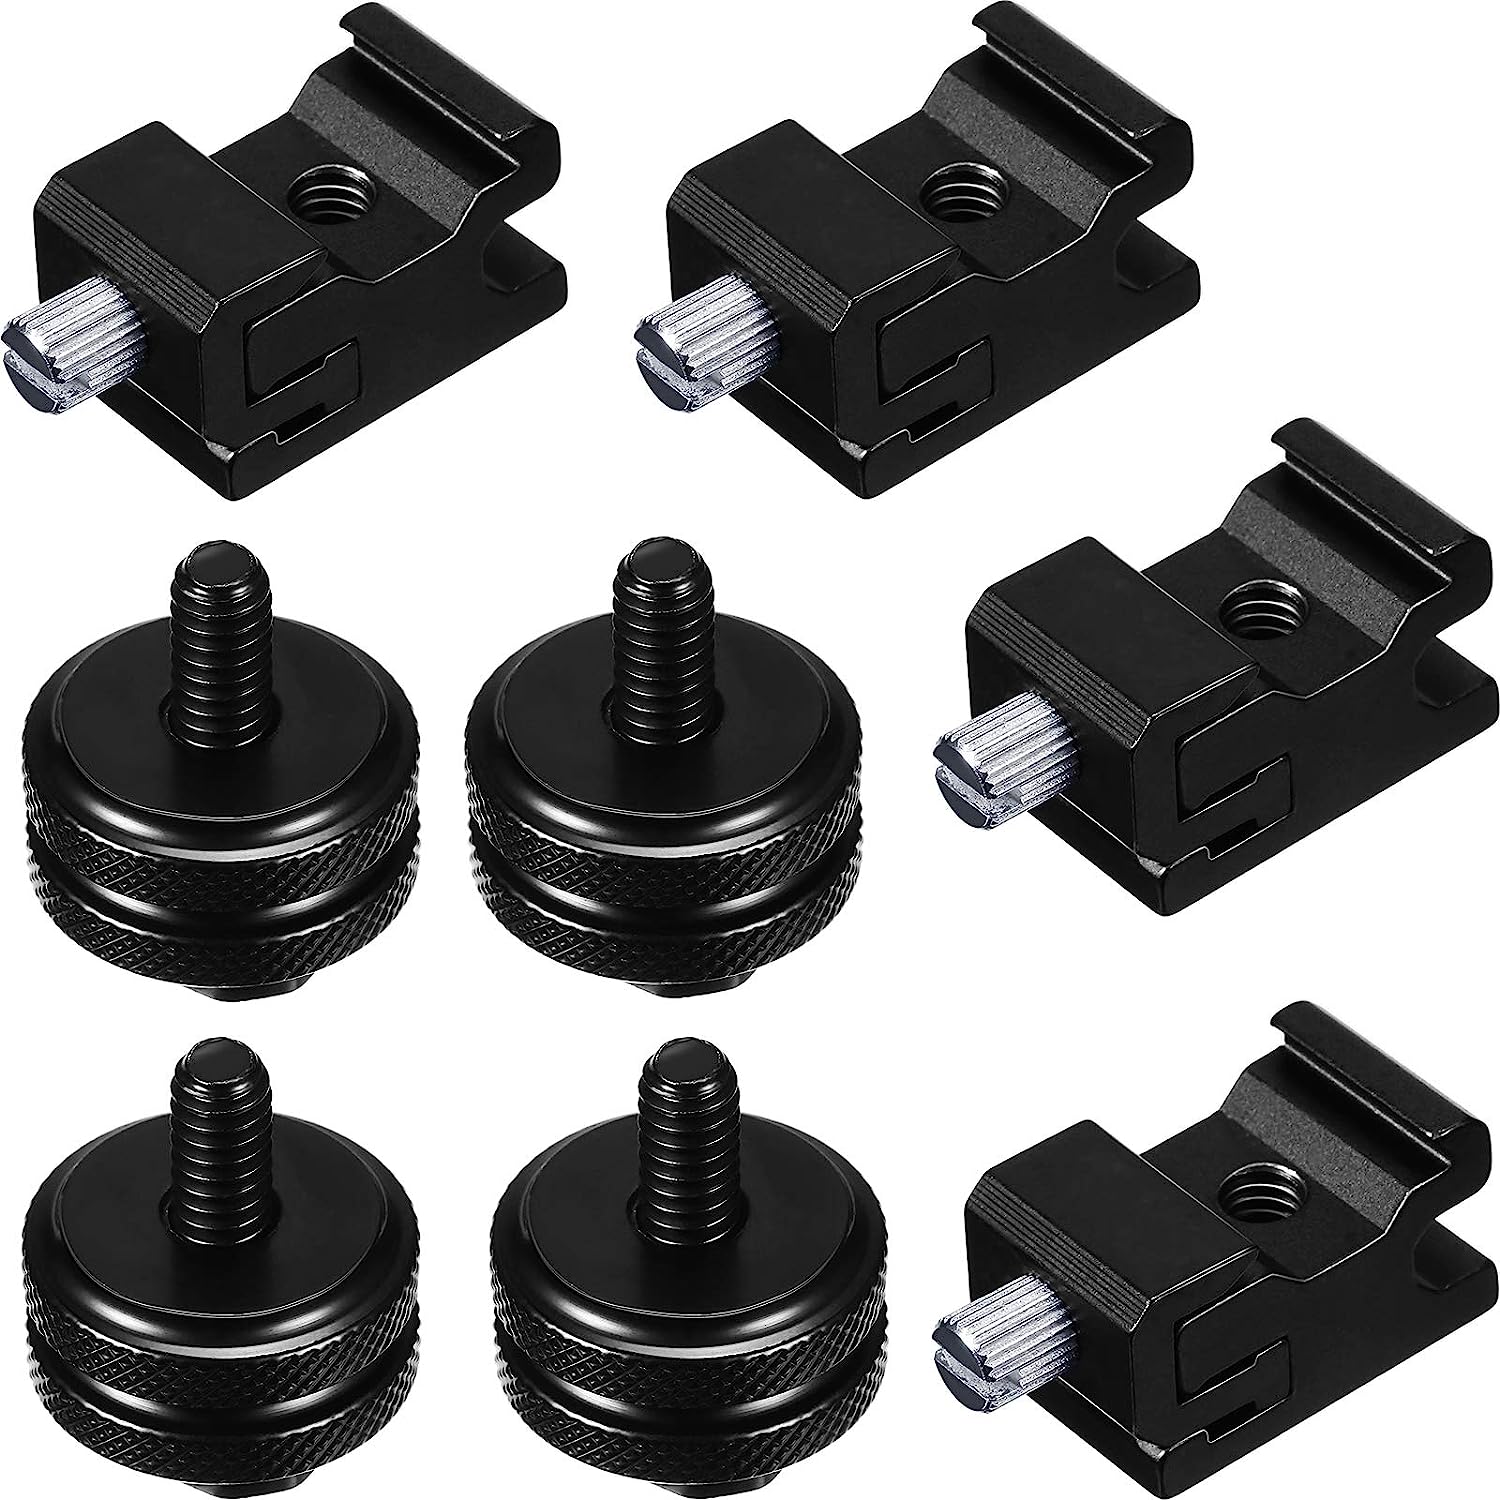 8 Pieces 1/4 Inch Cold Shoe Mount Adapter and Hot Shoe [...]